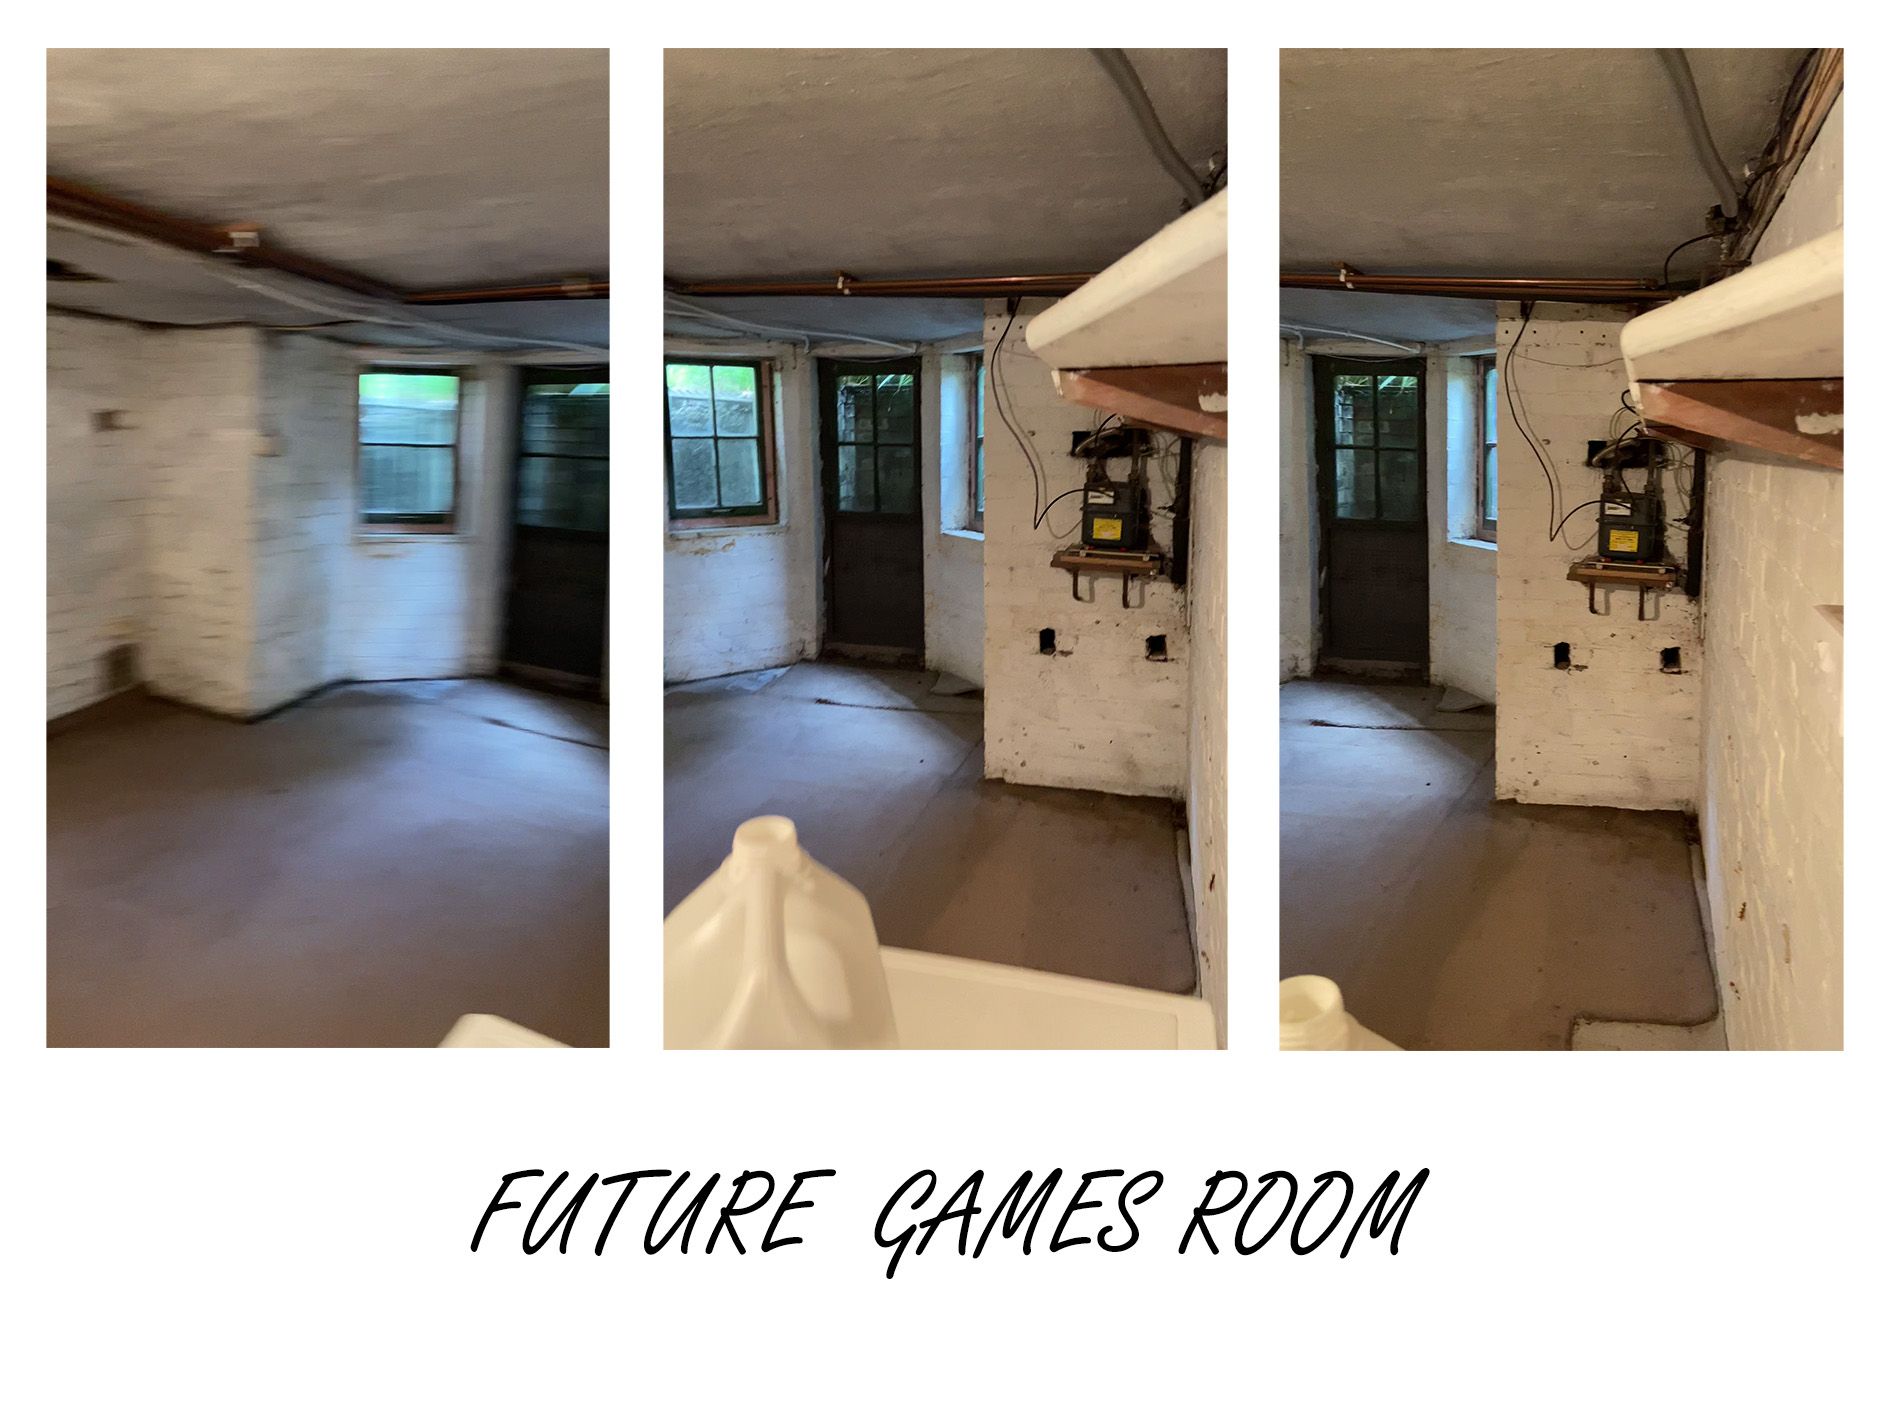 Photograph of a basement room prior to renovation